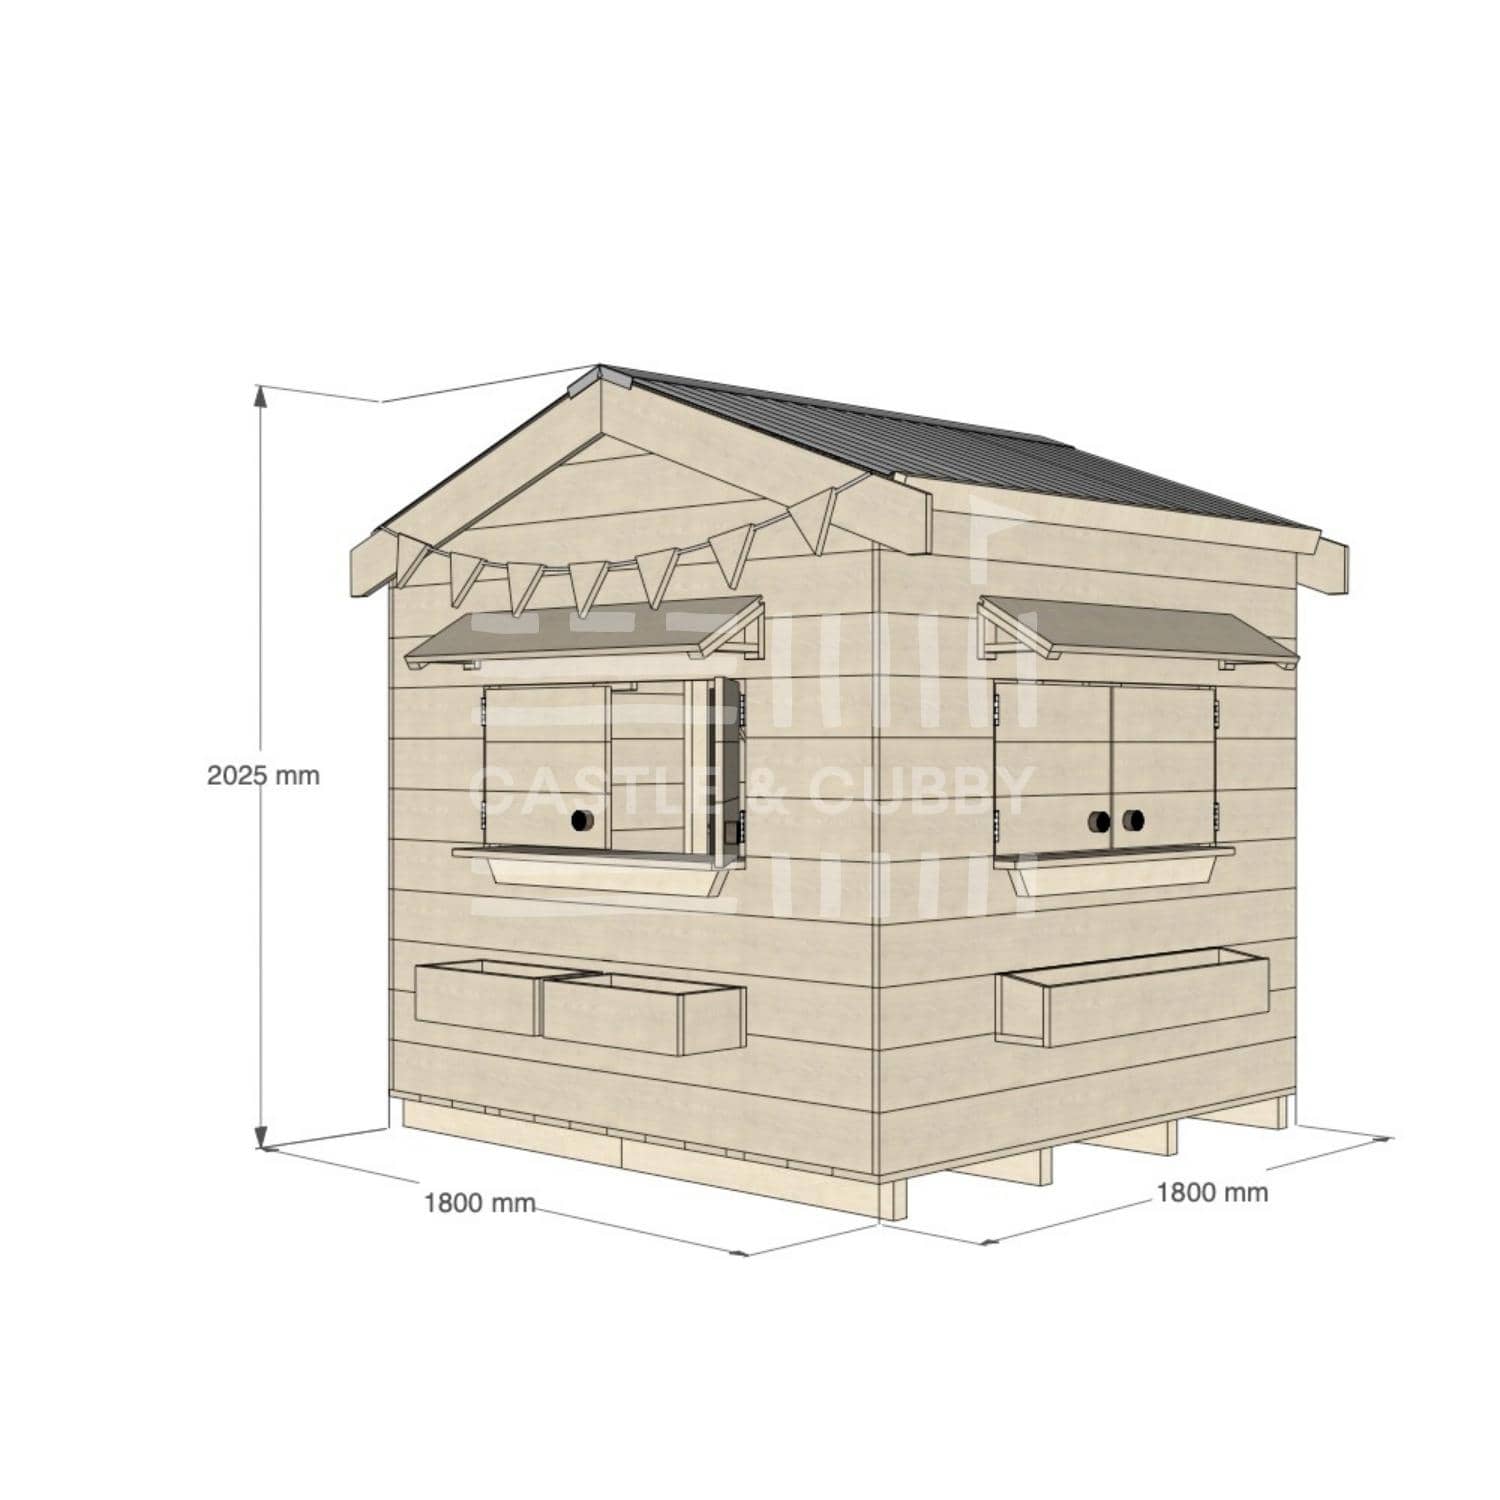 Pitched roof raw wooden cubby house residential and family homes midi square dimensions